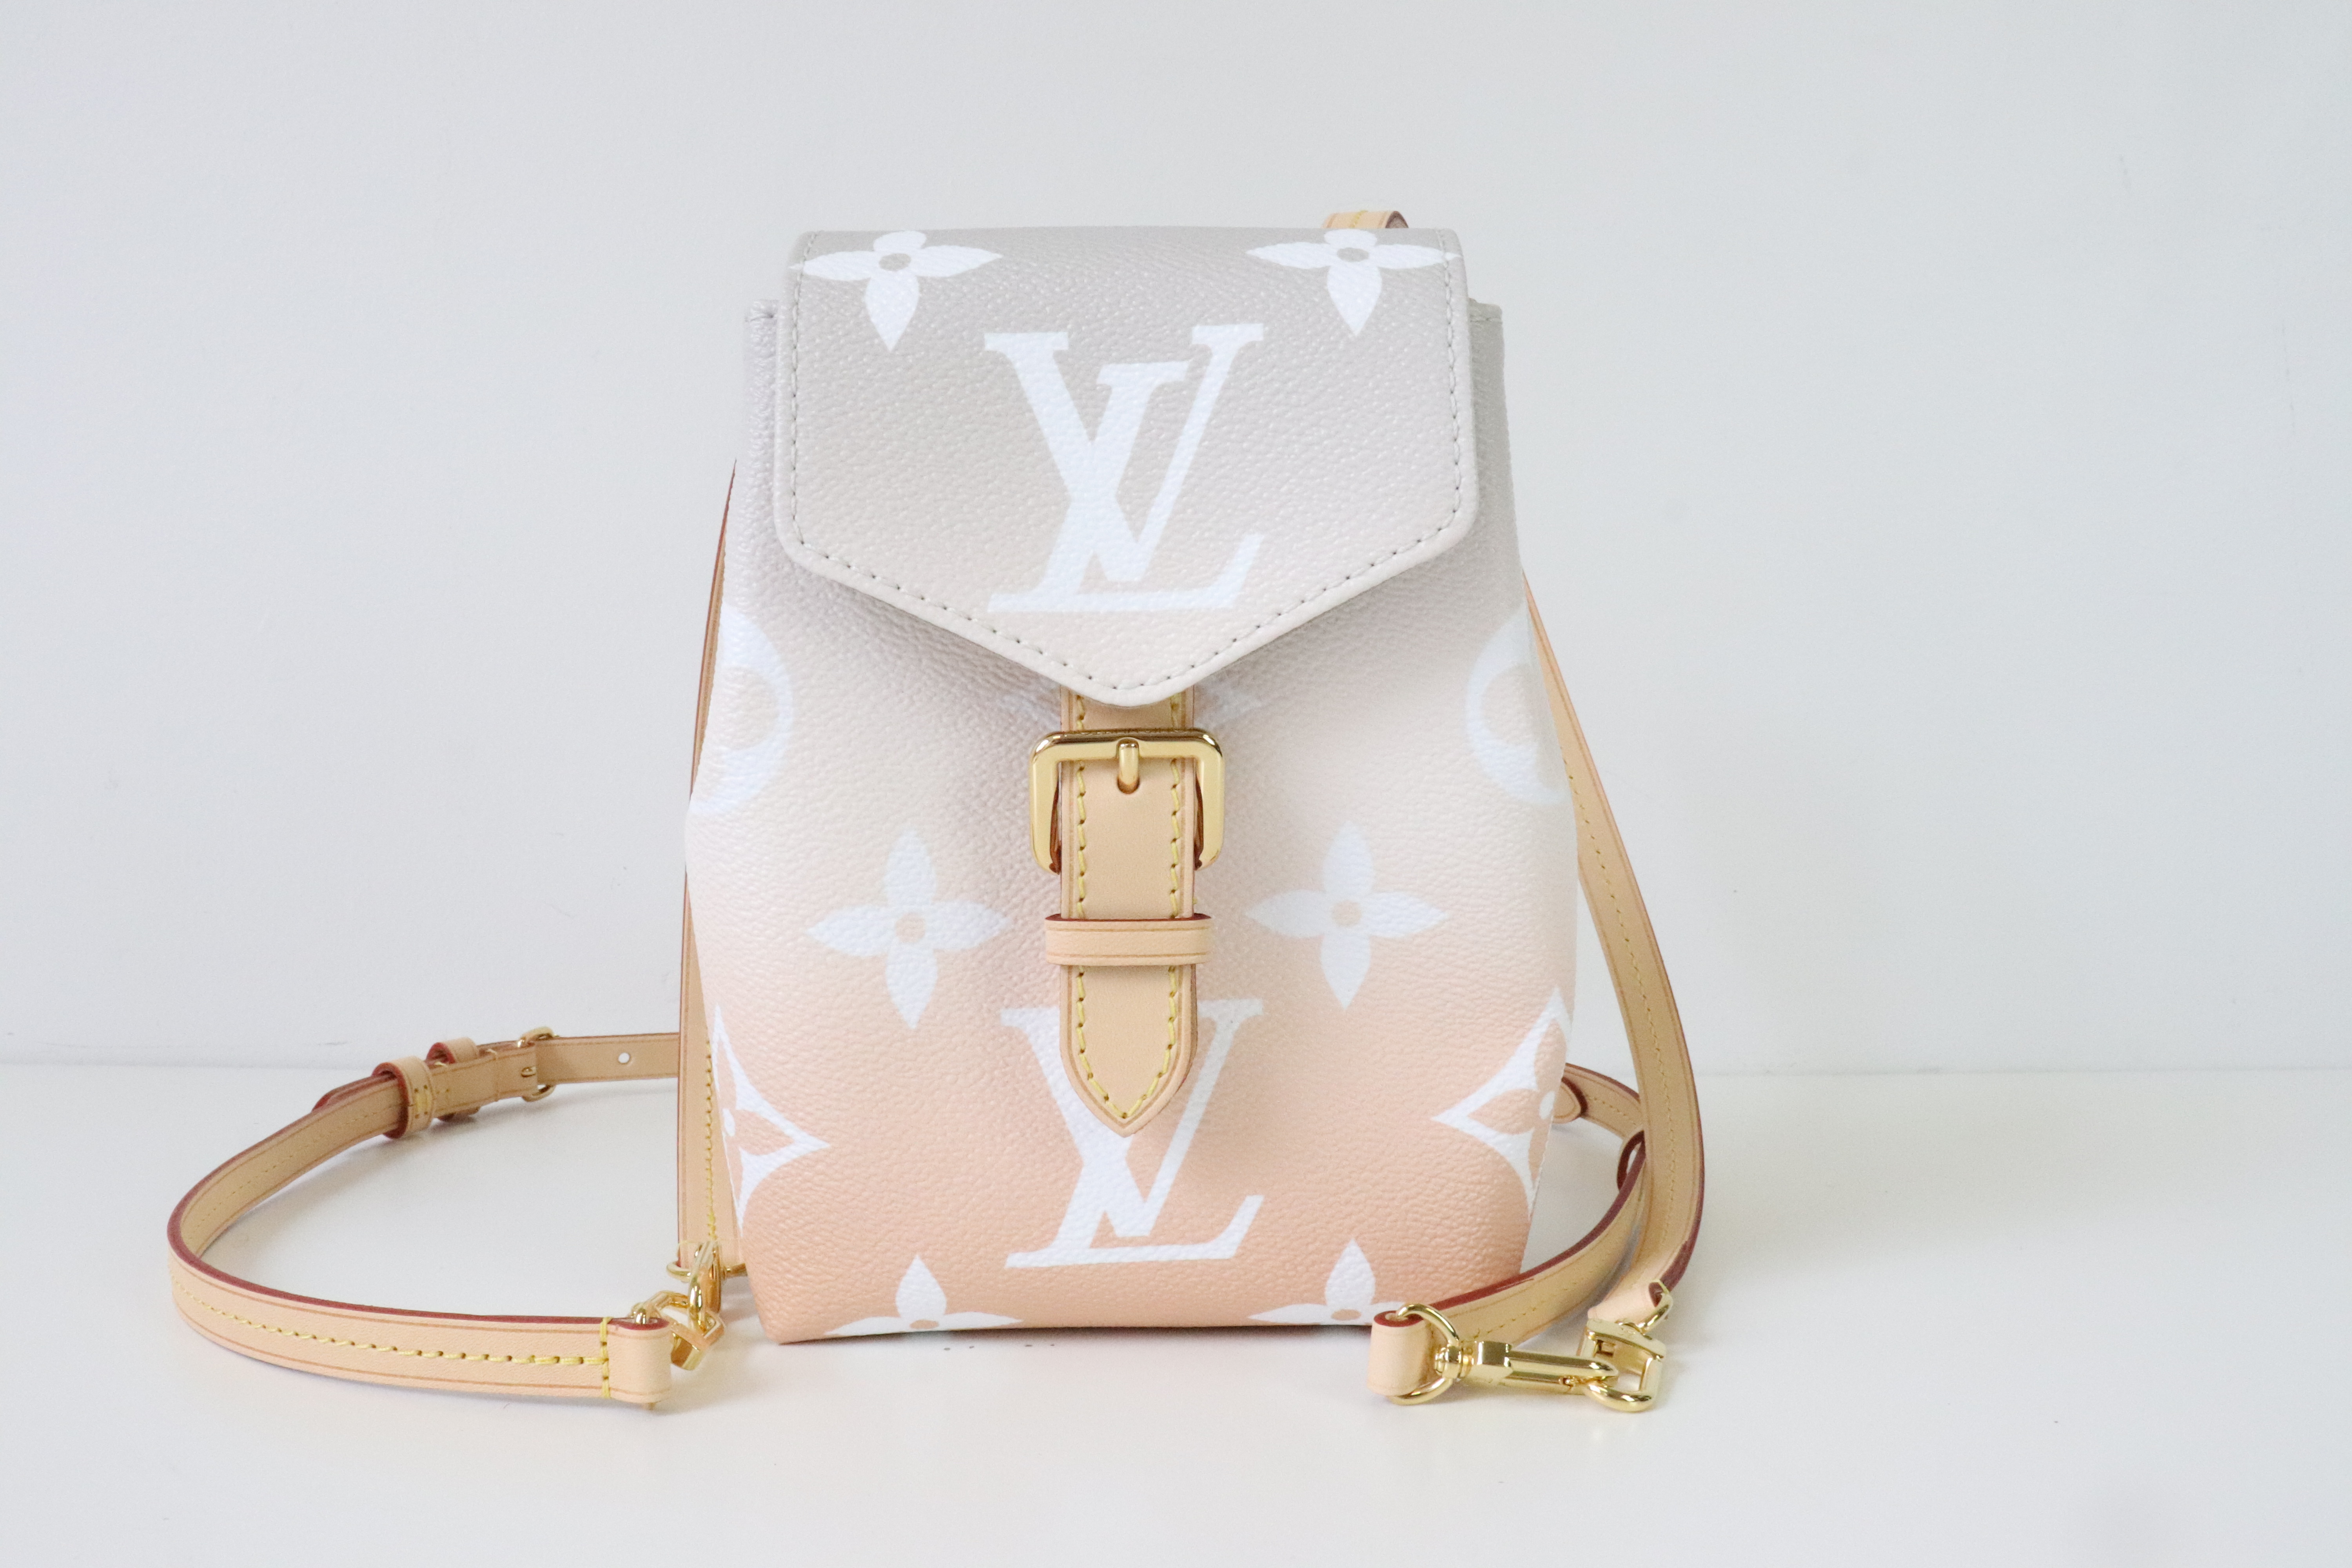 LOUIS VUITTON BY THE POOL MIST BRUME CREME TINY BACKPACK, GIANT